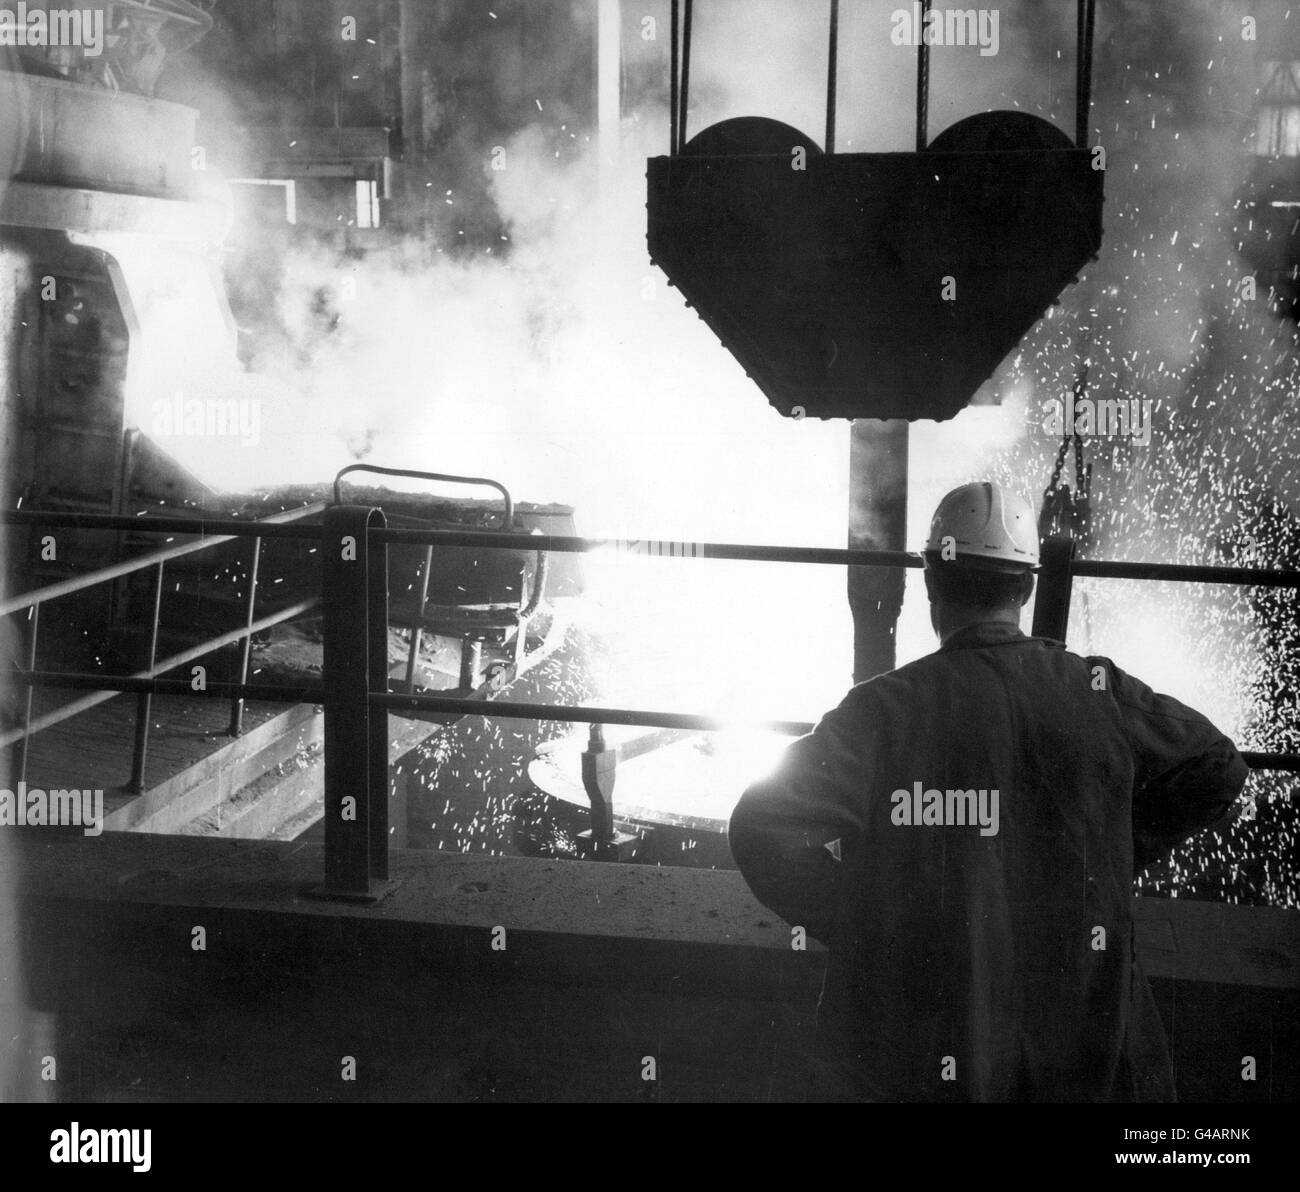 PA News,PHOTO ASSISTANT SHIFT MANAGER D. NICHOLSON AT THE STOCKSBRIDGE STEEL WORKS OBSERVING THE TAPPING OF AN ELECTRIC ARC FURNACE (POURING THE MOLTEN METAL FROM THE FURNACE INTO THE LADLE). 02/02/2004 Steel production could be cut back worldwide, including the UK, following a big increase in the cost of raw materials, a new report warned Monday February 2 2004. Stock Photo